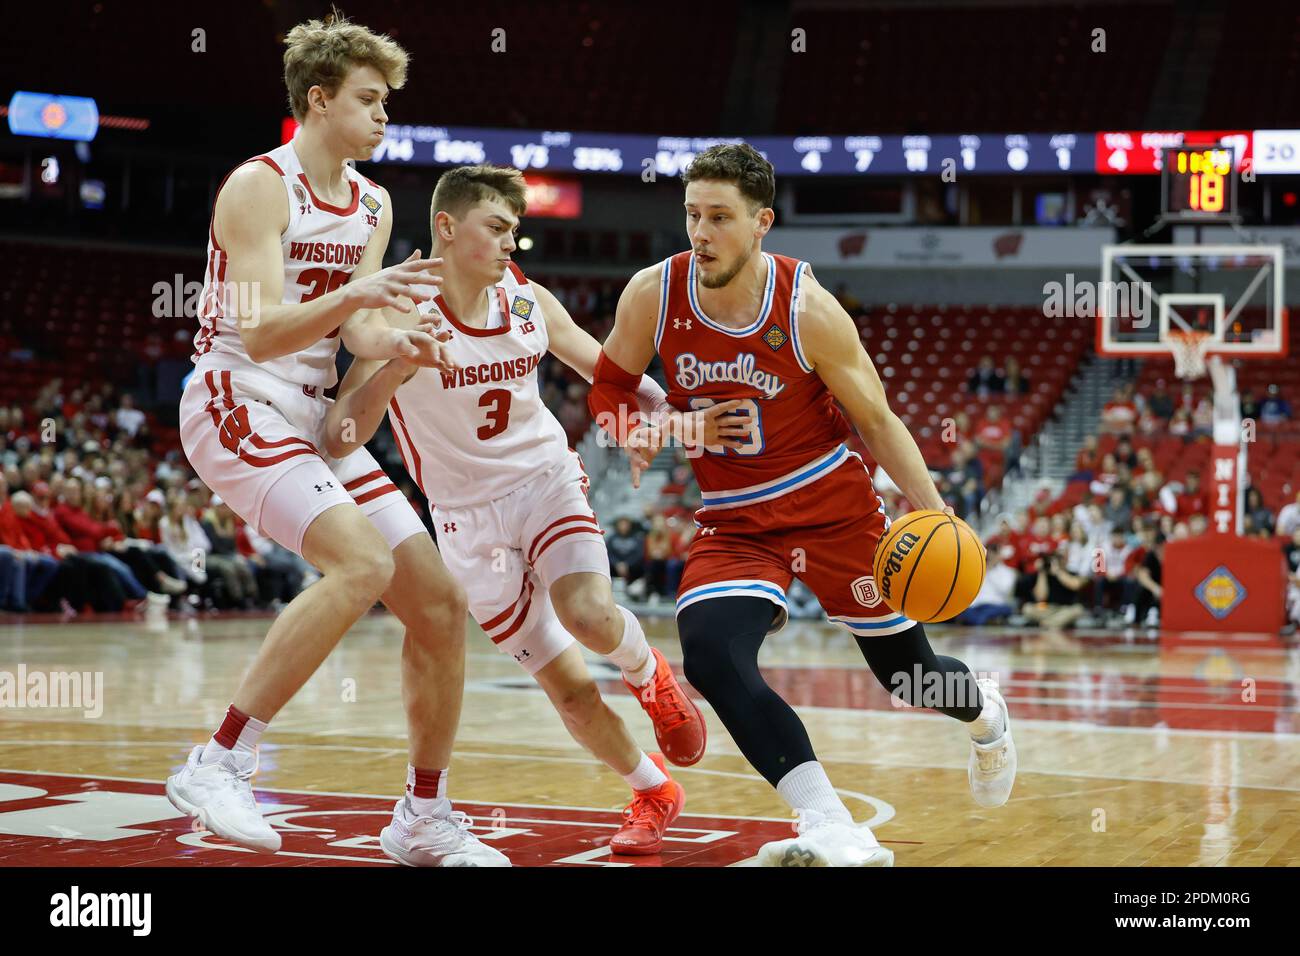 Madison, WI, USA. 14th Mar, 2023. Bradley Braves guard Ville Tahvanainen (23) drives against Wisconsin Badgers guard Connor Essegian (3) and forward Markus Ilver (35) during the NCAA basketball NIT First Round game between the Bradley Braves and the Wisconsin Badgers at the Kohl Center in Madison, WI. Darren Lee/CSM/Alamy Live News Stock Photo